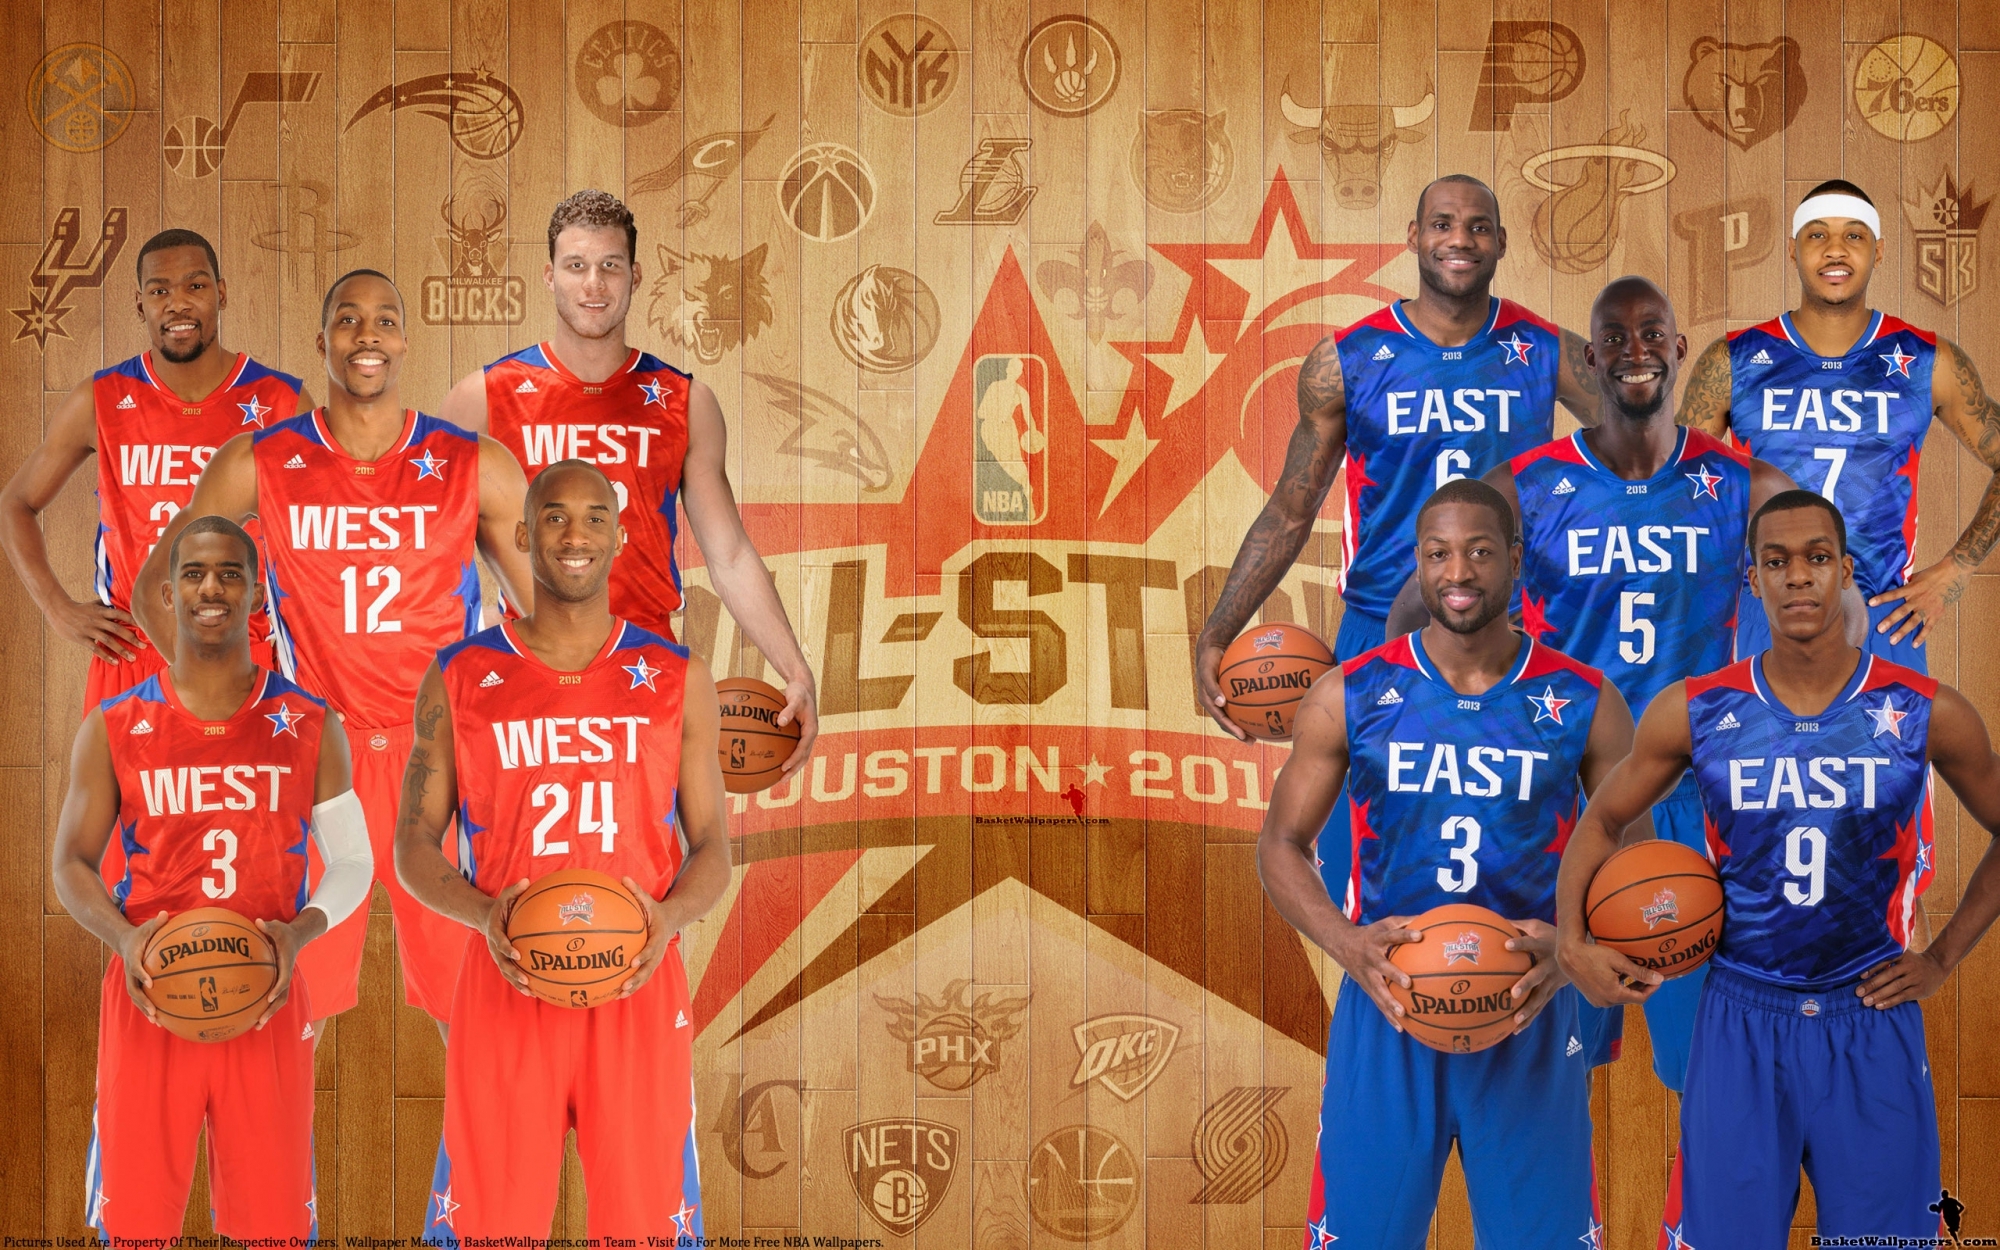 West wins in 2013 All-Star Game